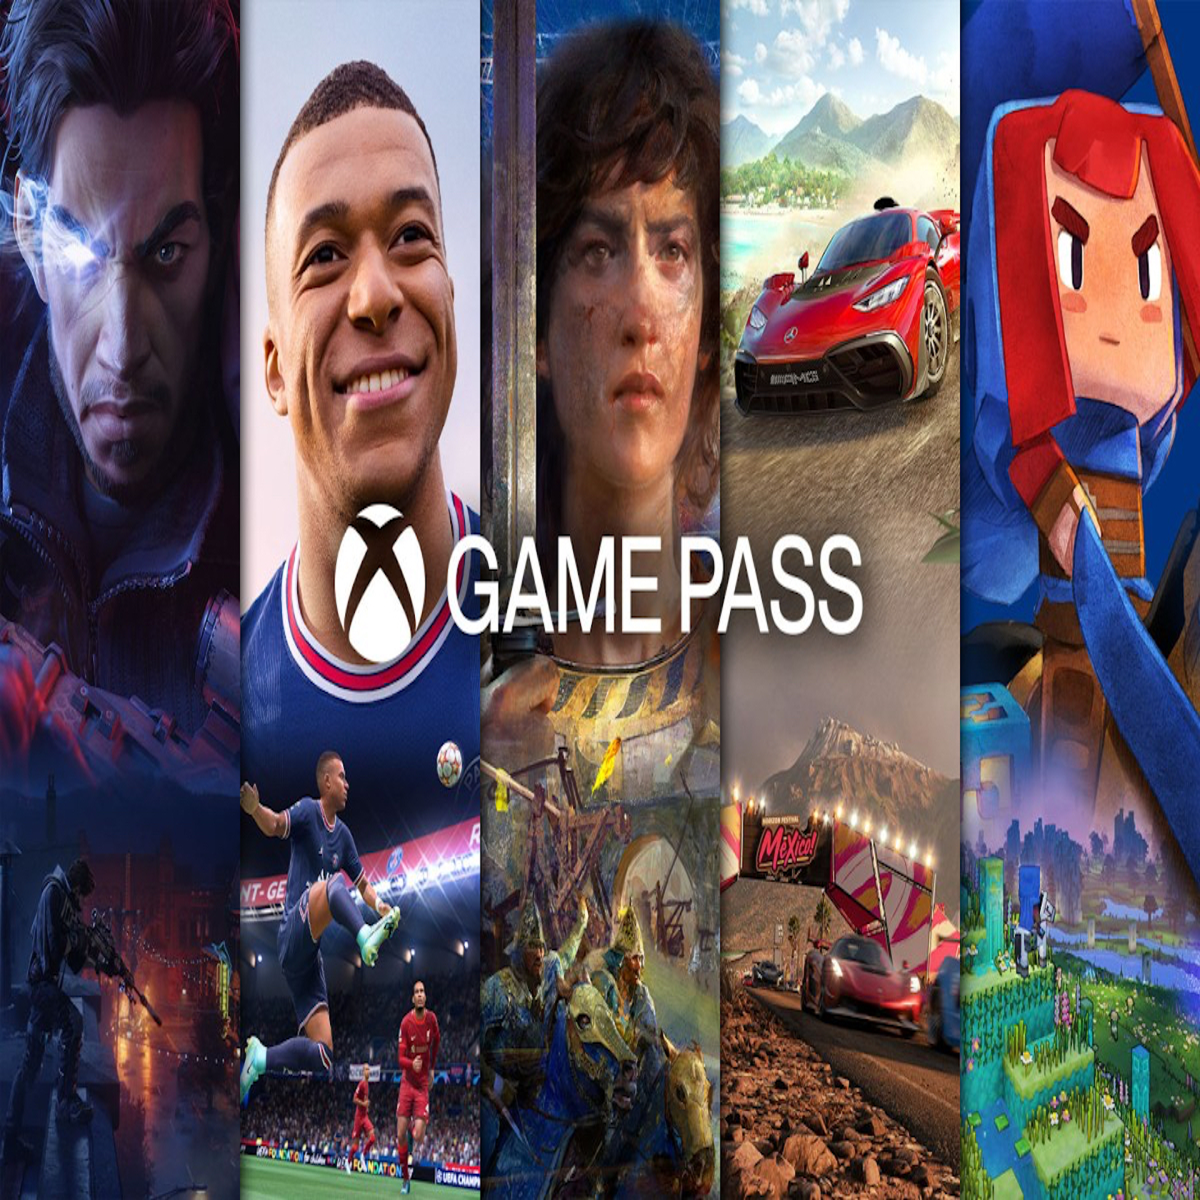 Microsoft's PC Game Pass launches in 40 new countries - The Verge